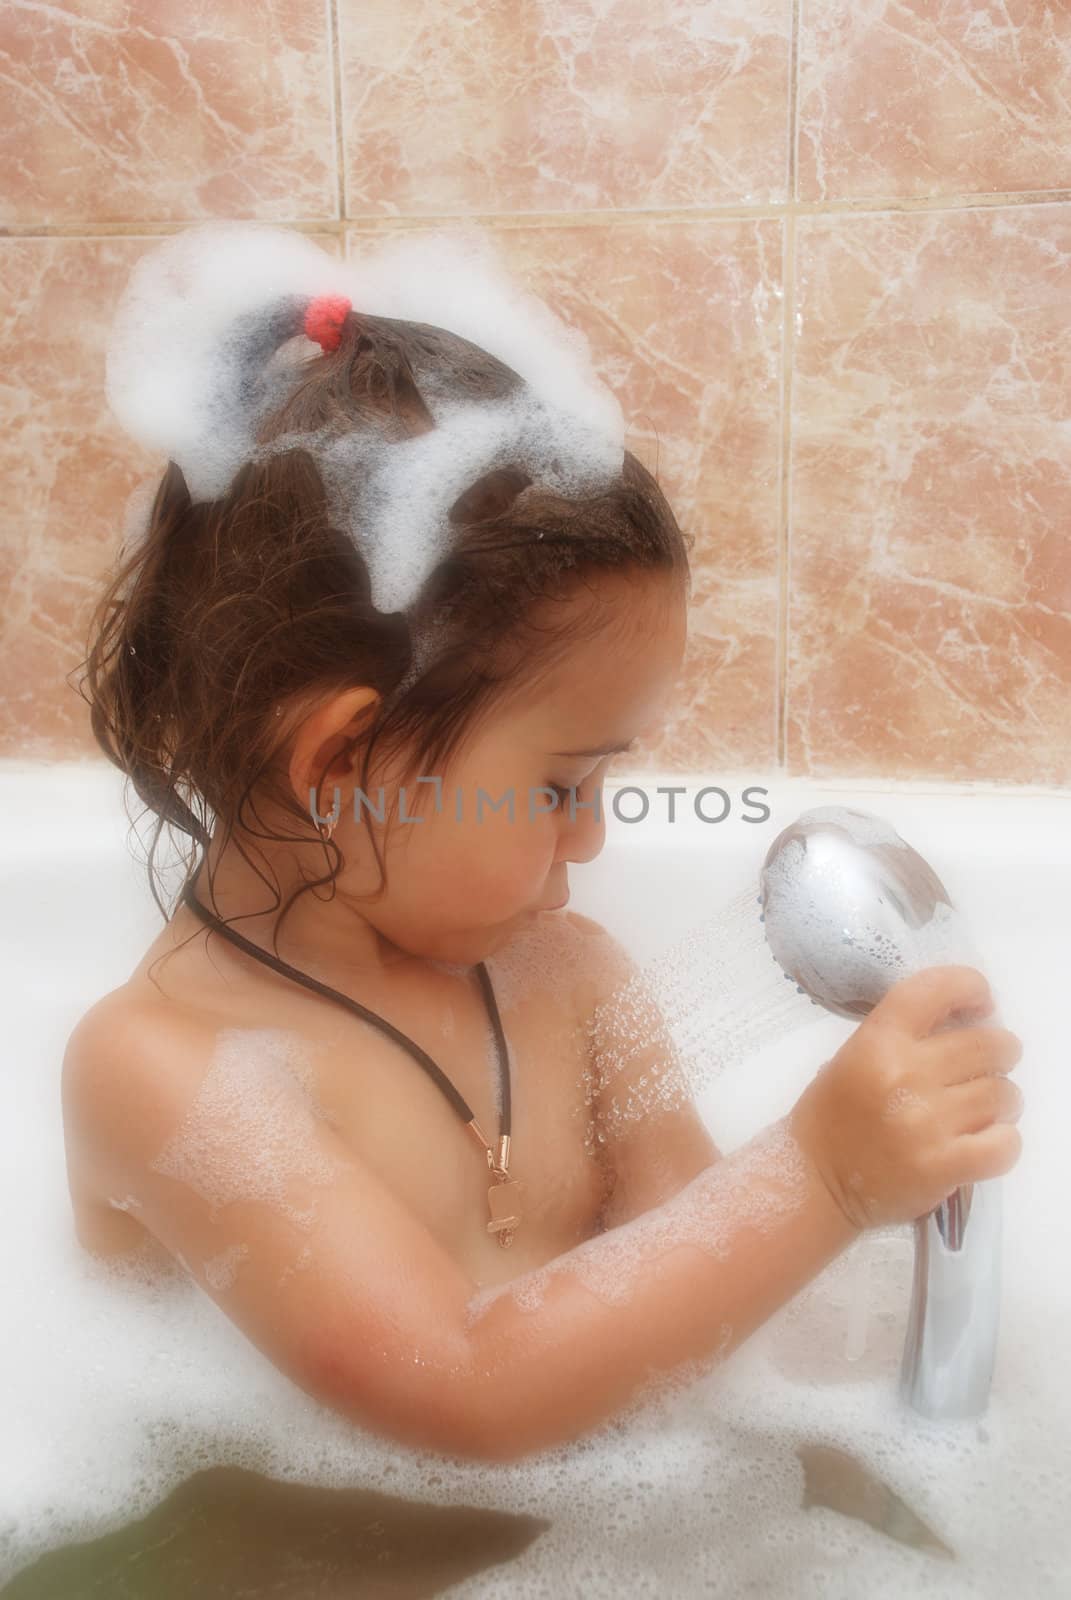 little girl take a bath. Fluffy foam round its body and on her head.